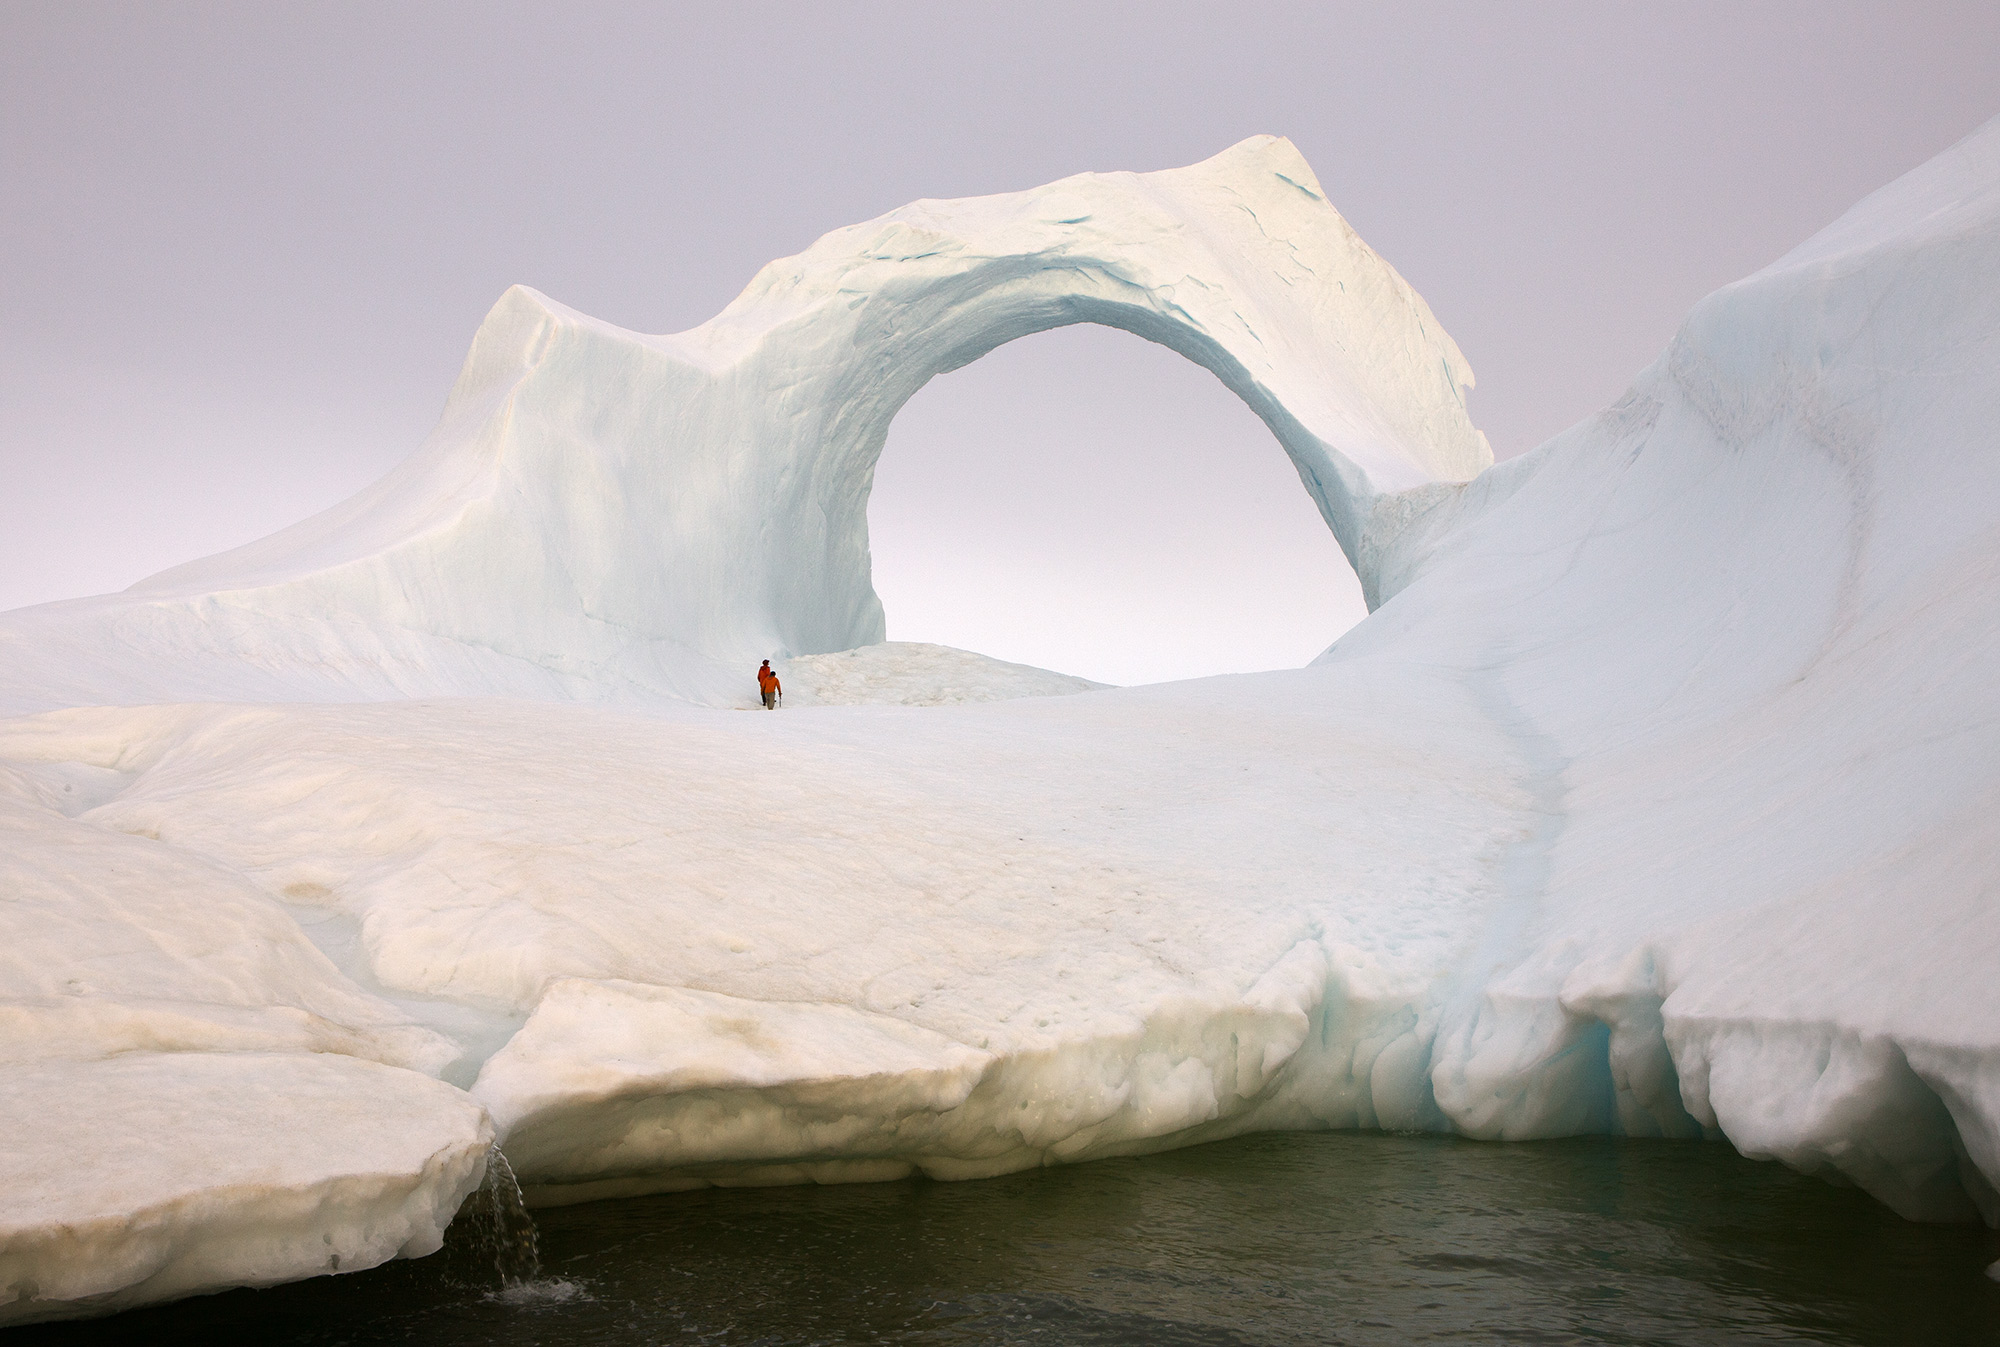 Huge iceberg in the shape of an arch